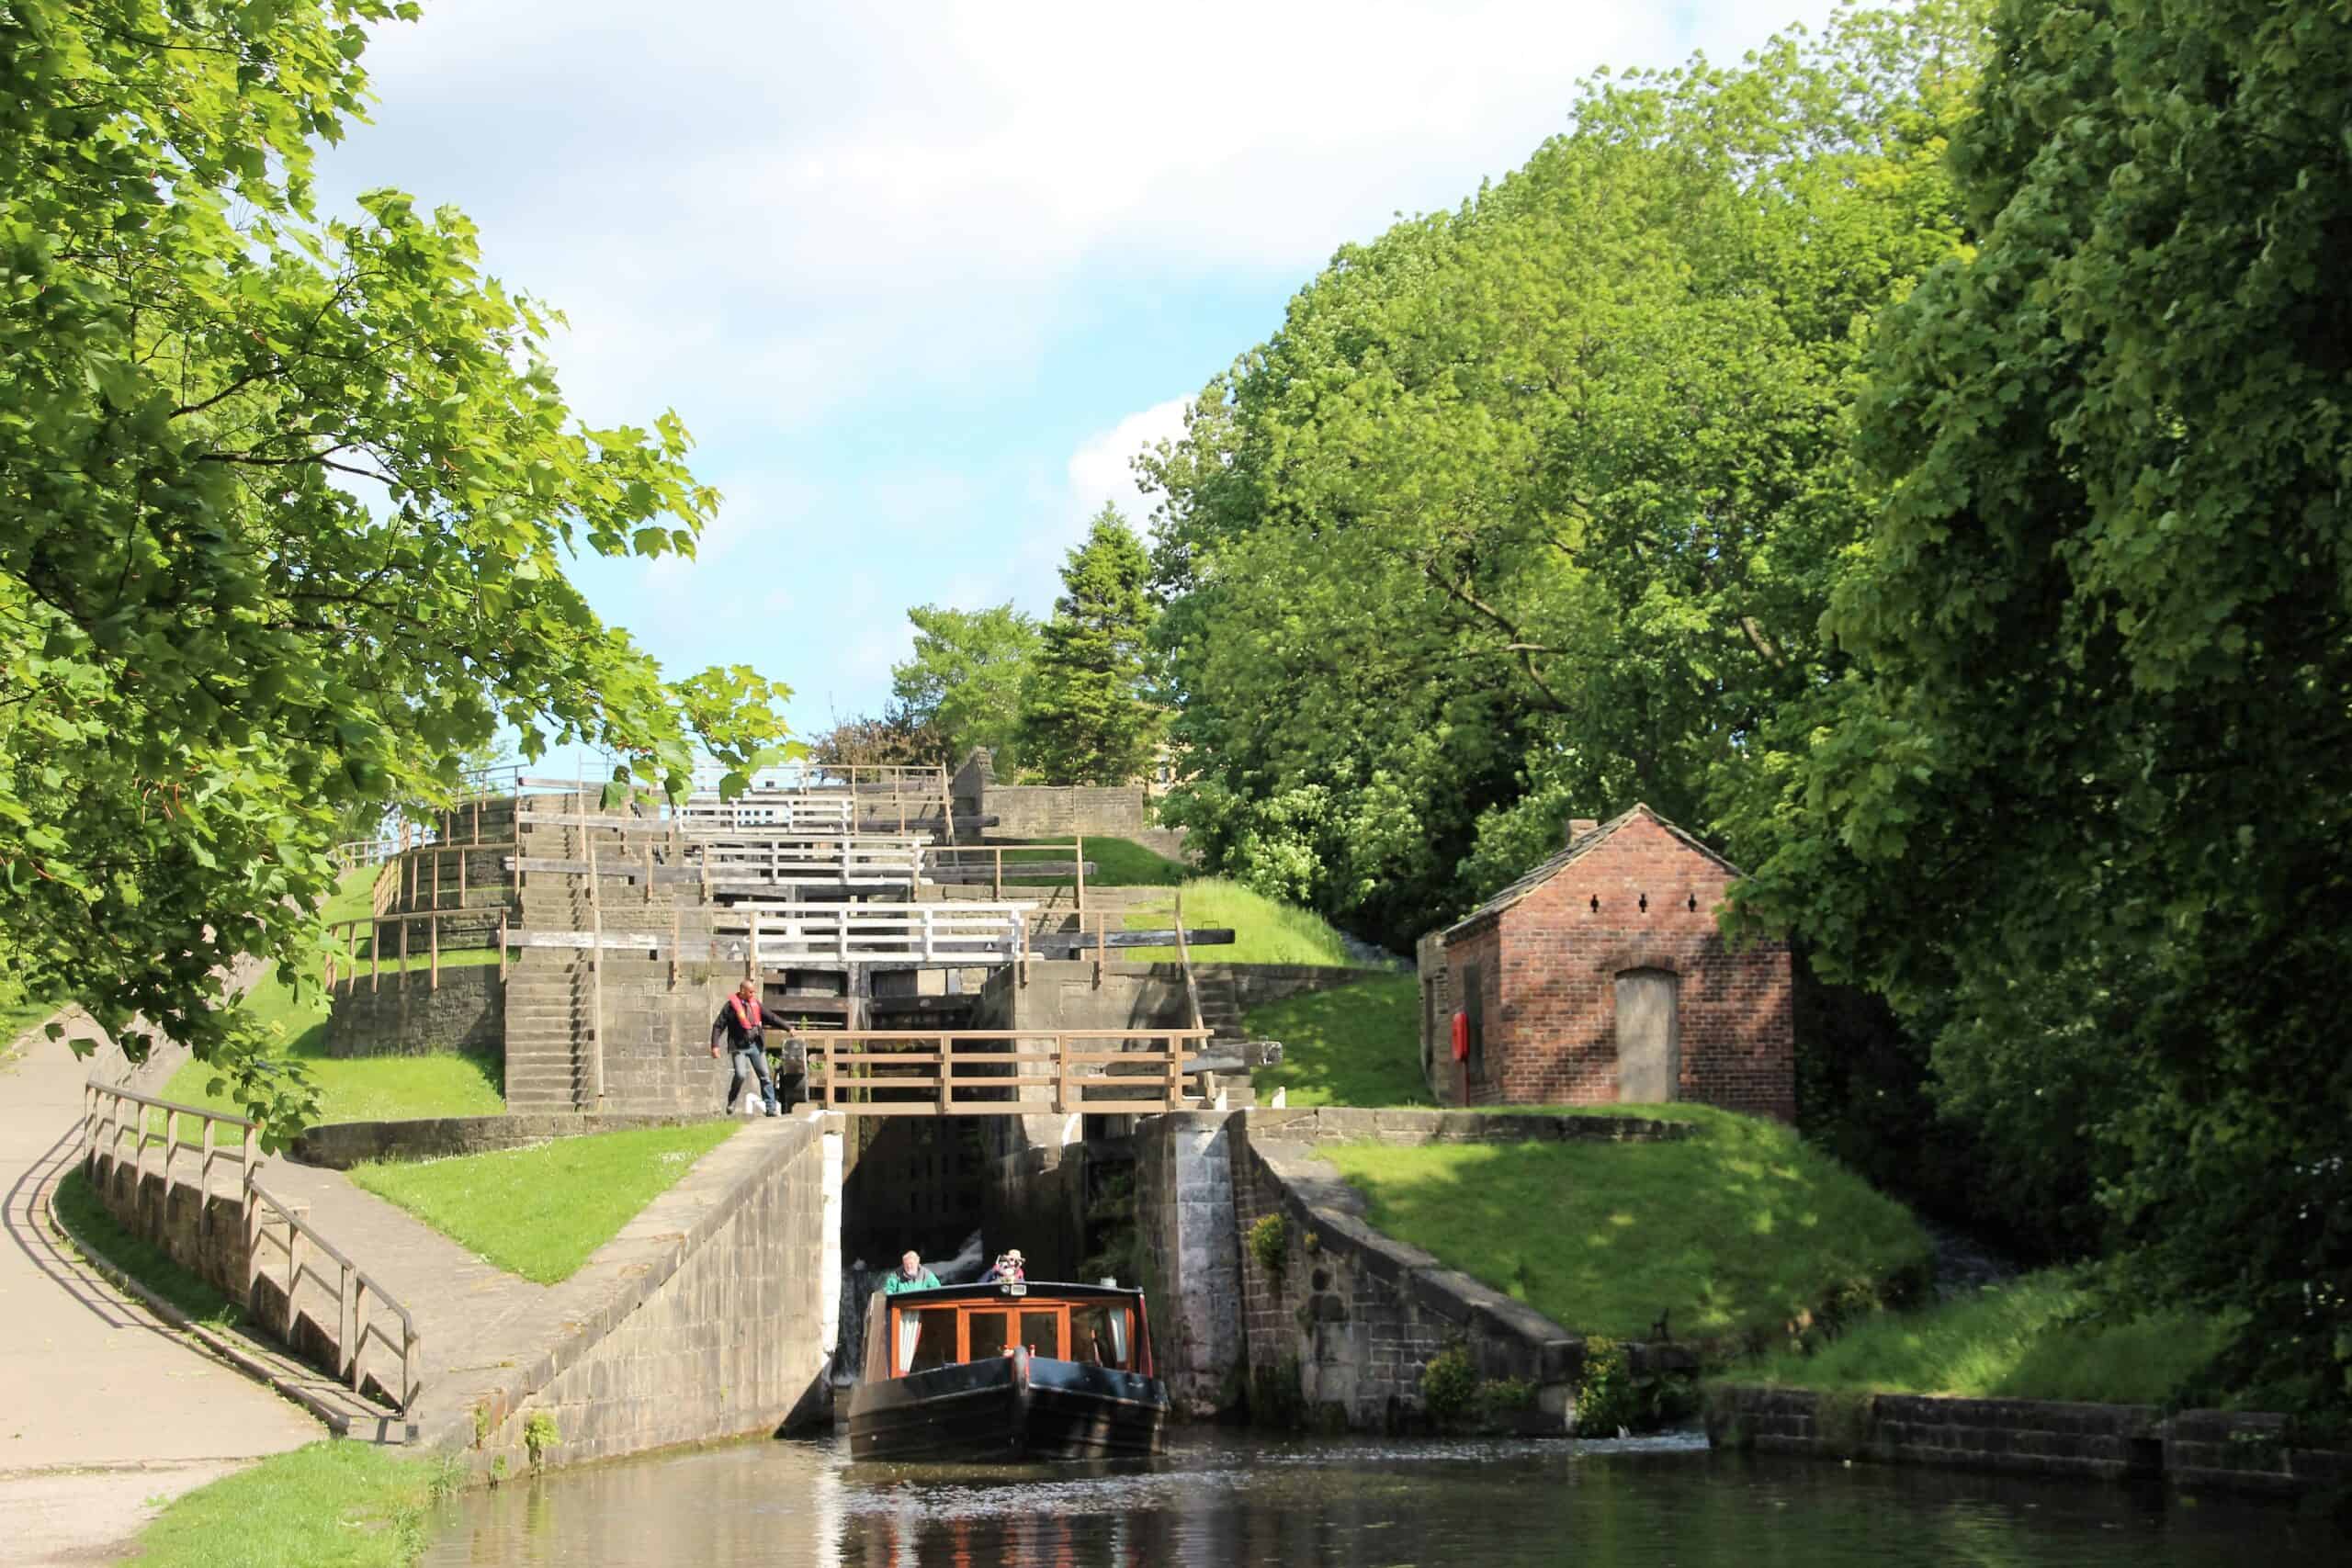 Short breaks on the Leeds & Liverpool Canal